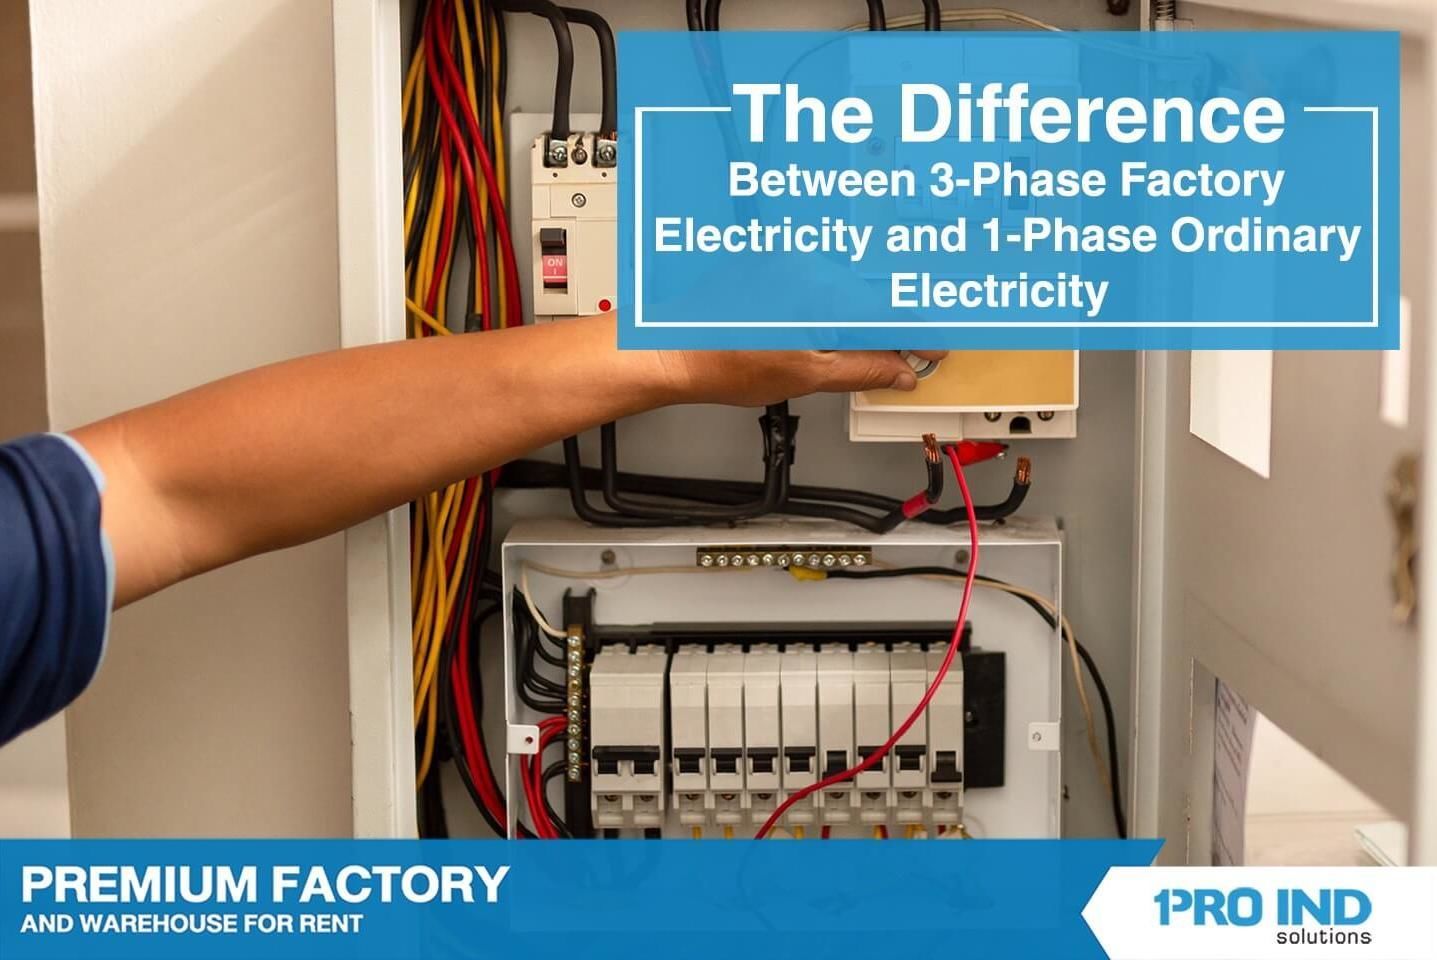 we would briefly provide brief descriptions of these two distinct electrical systems. Also, we would explain why the 1-phrase electrical network is for household uses, while the 3-phrase system is for